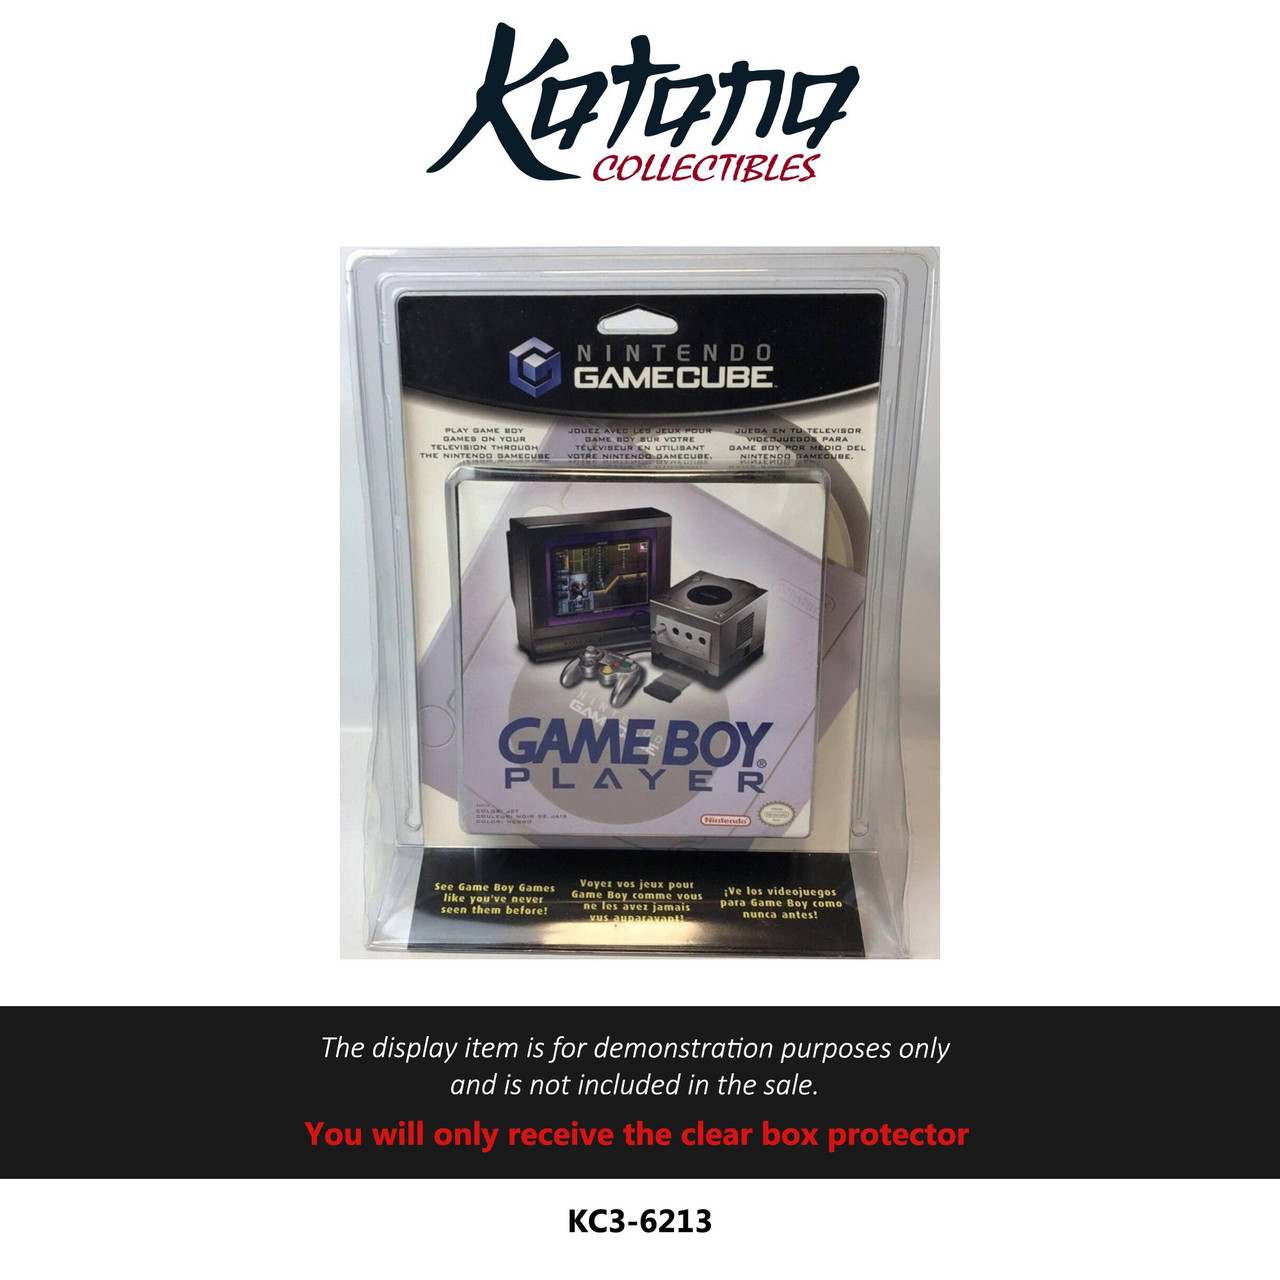 Katana Collectibles Protector For Gamecube Gameboy Player Blister